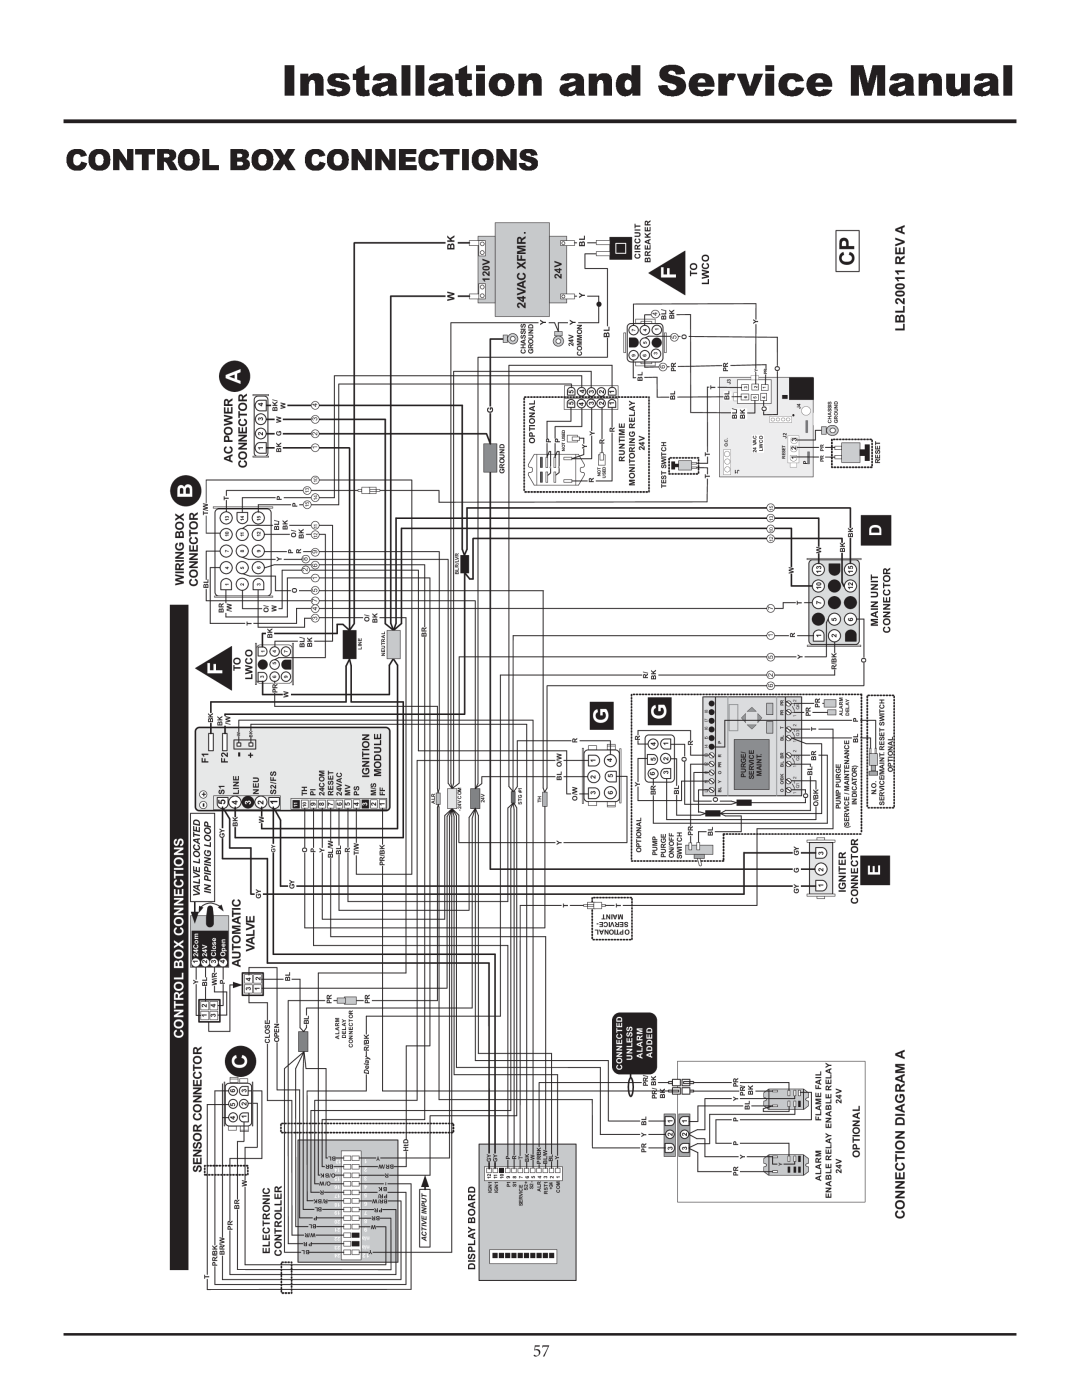 Lochinvar F0600187510 Installation and Service Manual, Control Box Connections, Connection Diagram A, Sensor Connector 